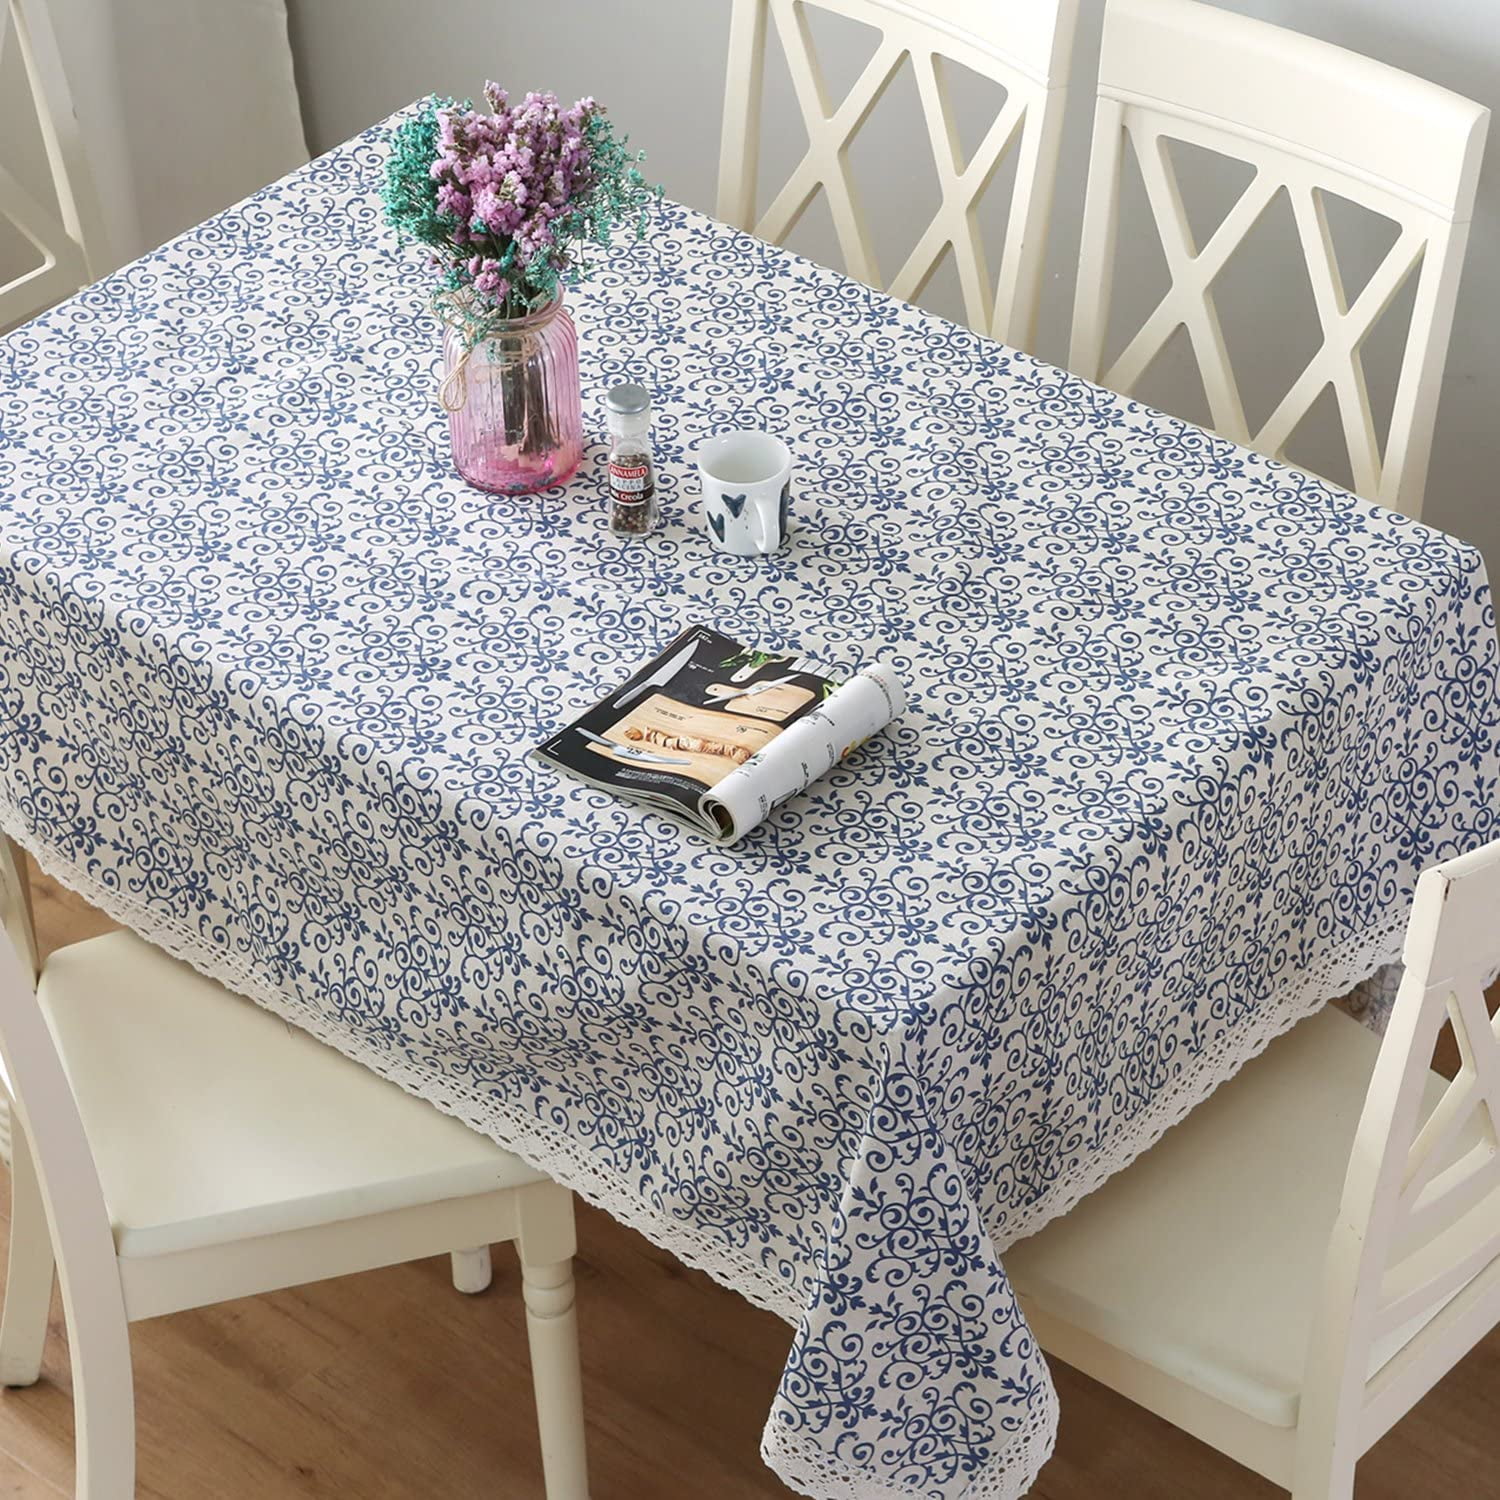 famibay Dustproof Washable Tablecloth,Everyday Kitchen Table Cloth Indoor Outdoor Decorative Macrame Lace Tablecloth Navy Blue Jacquard Damask Design（55 Inch x 98 Inch  Bangzhe-AA0005